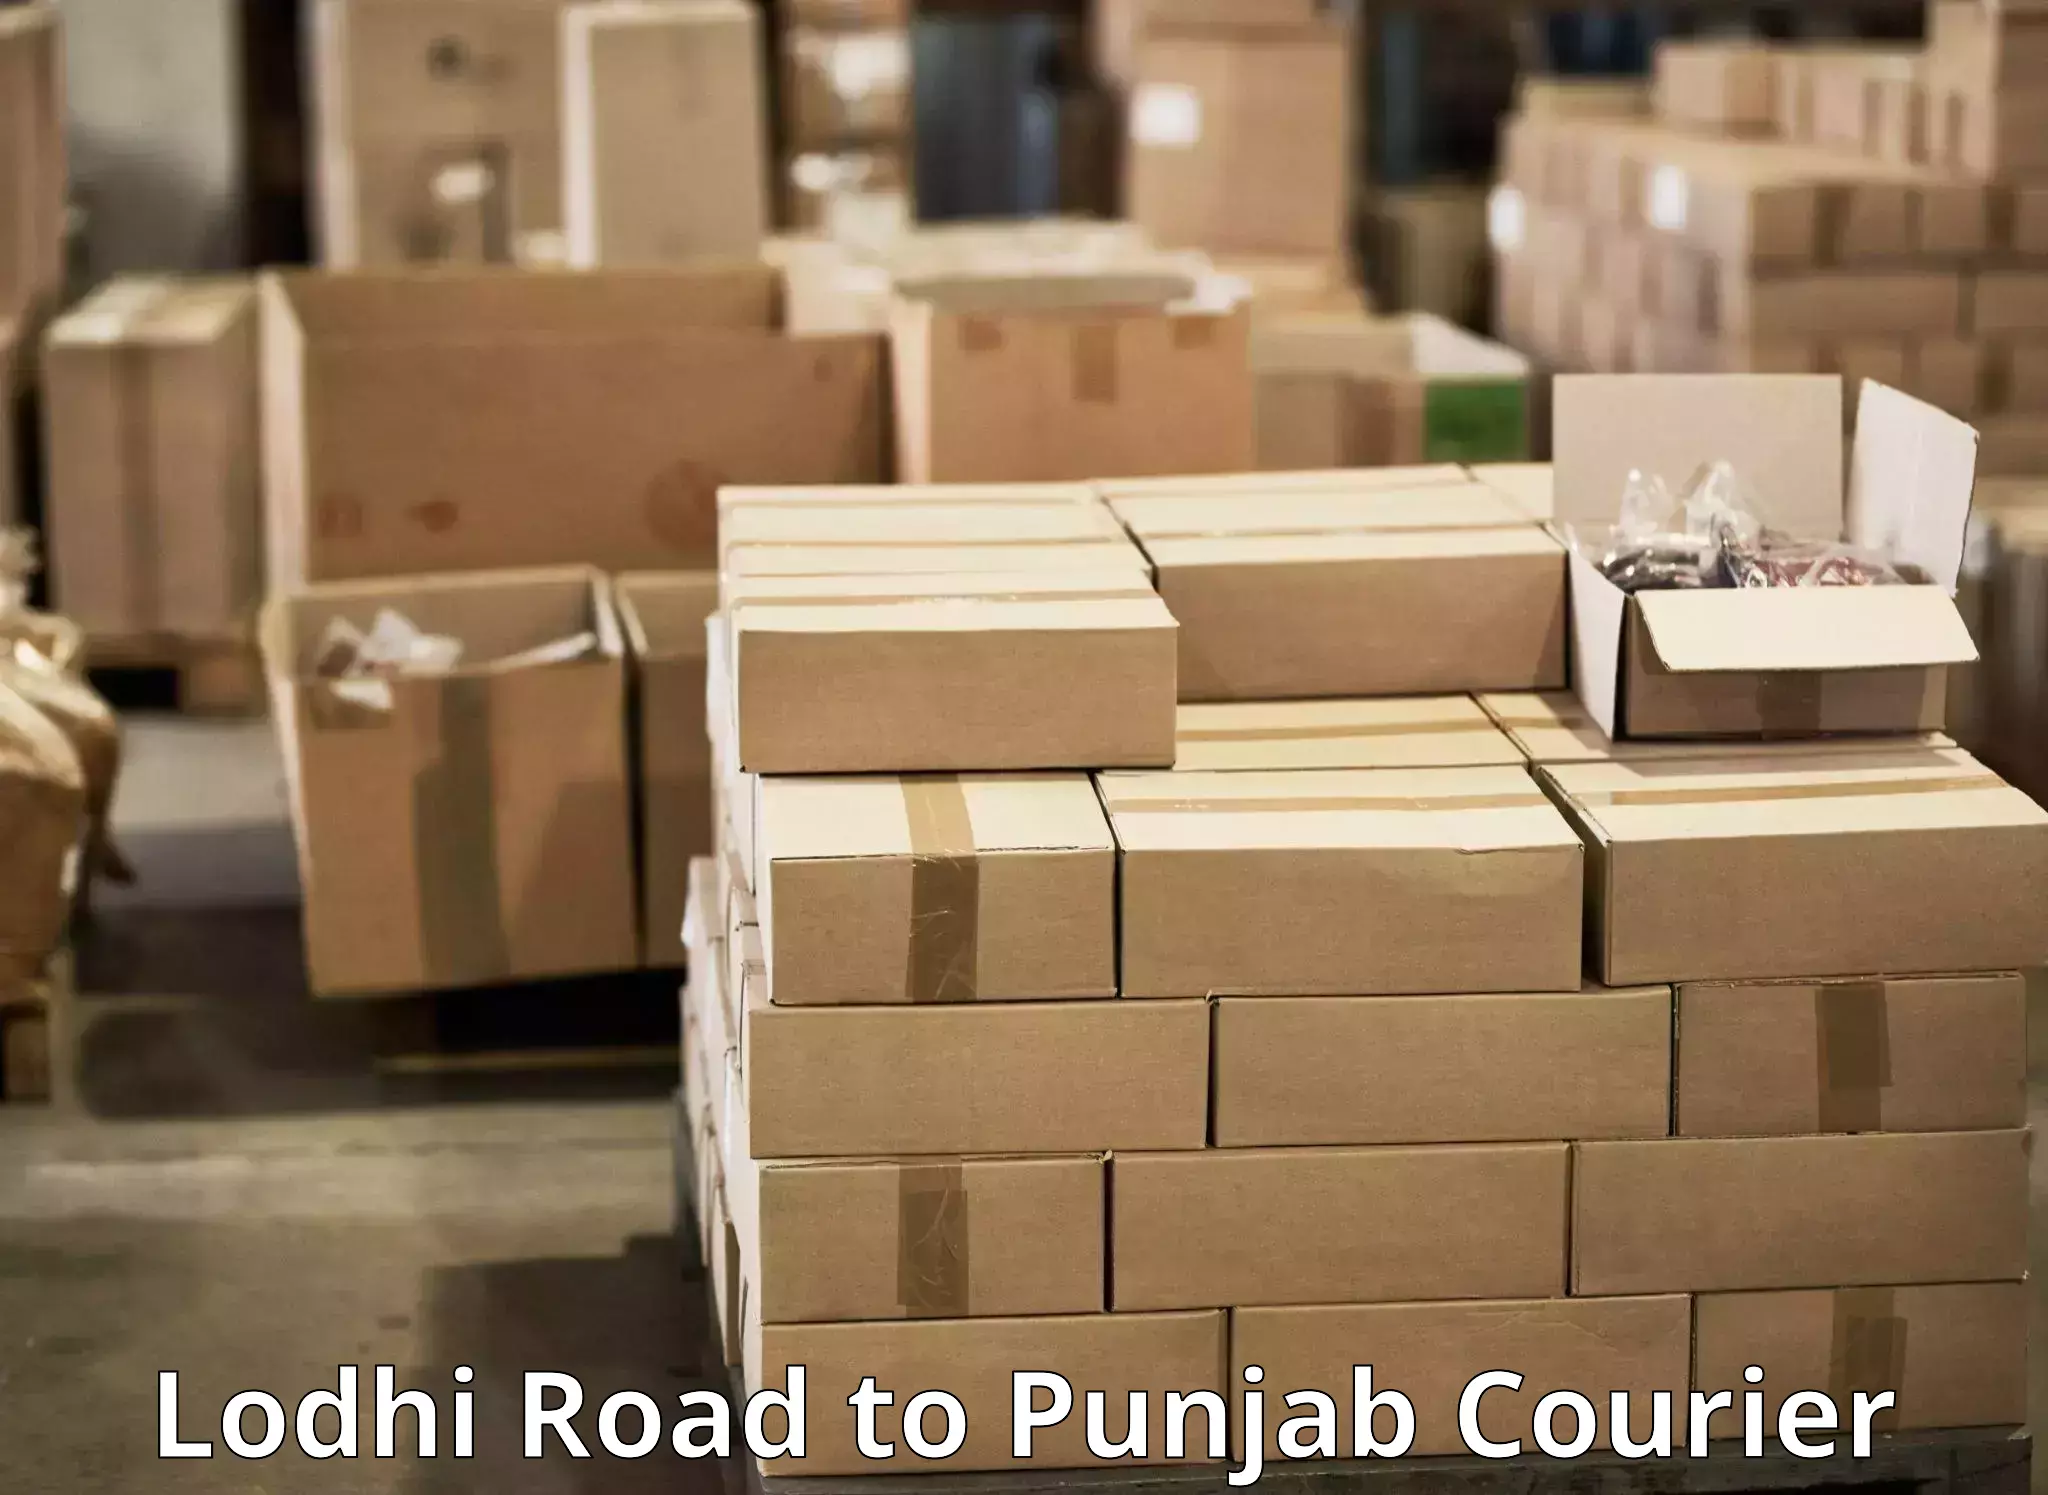 Delivery service partnership in Lodhi Road to Amritsar